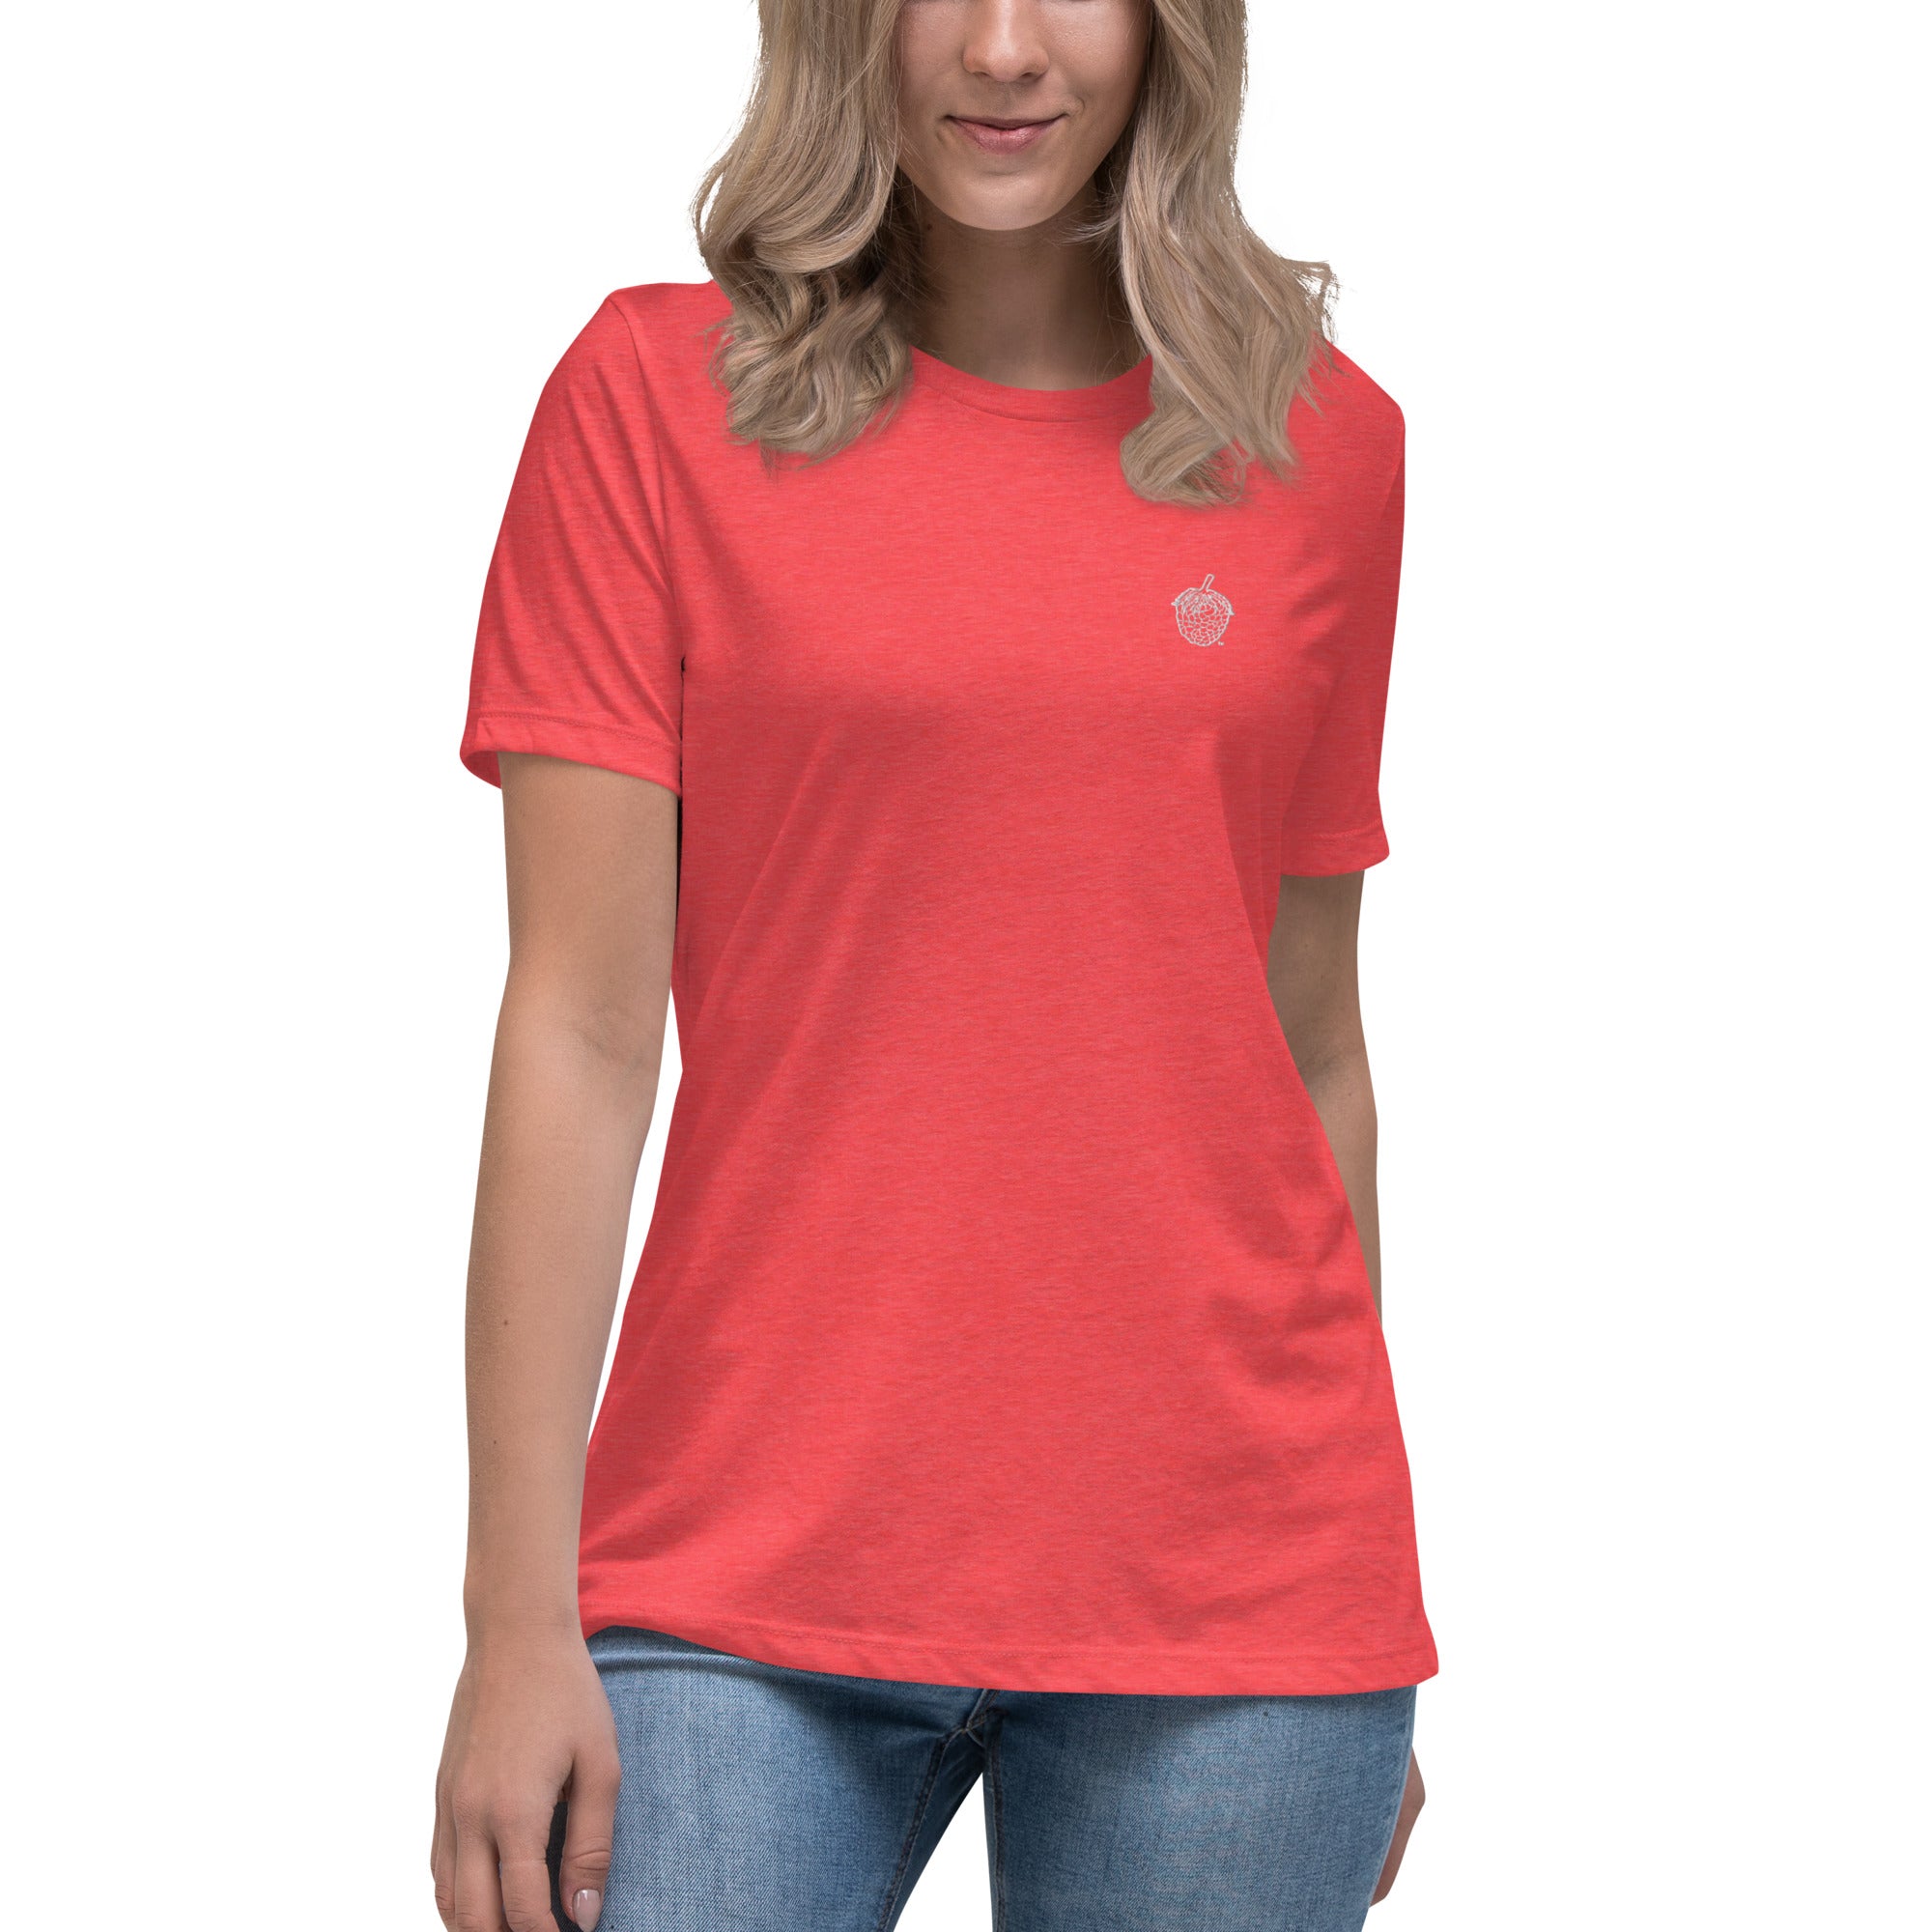 Stitched Berry Women's Relaxed T-Shirt